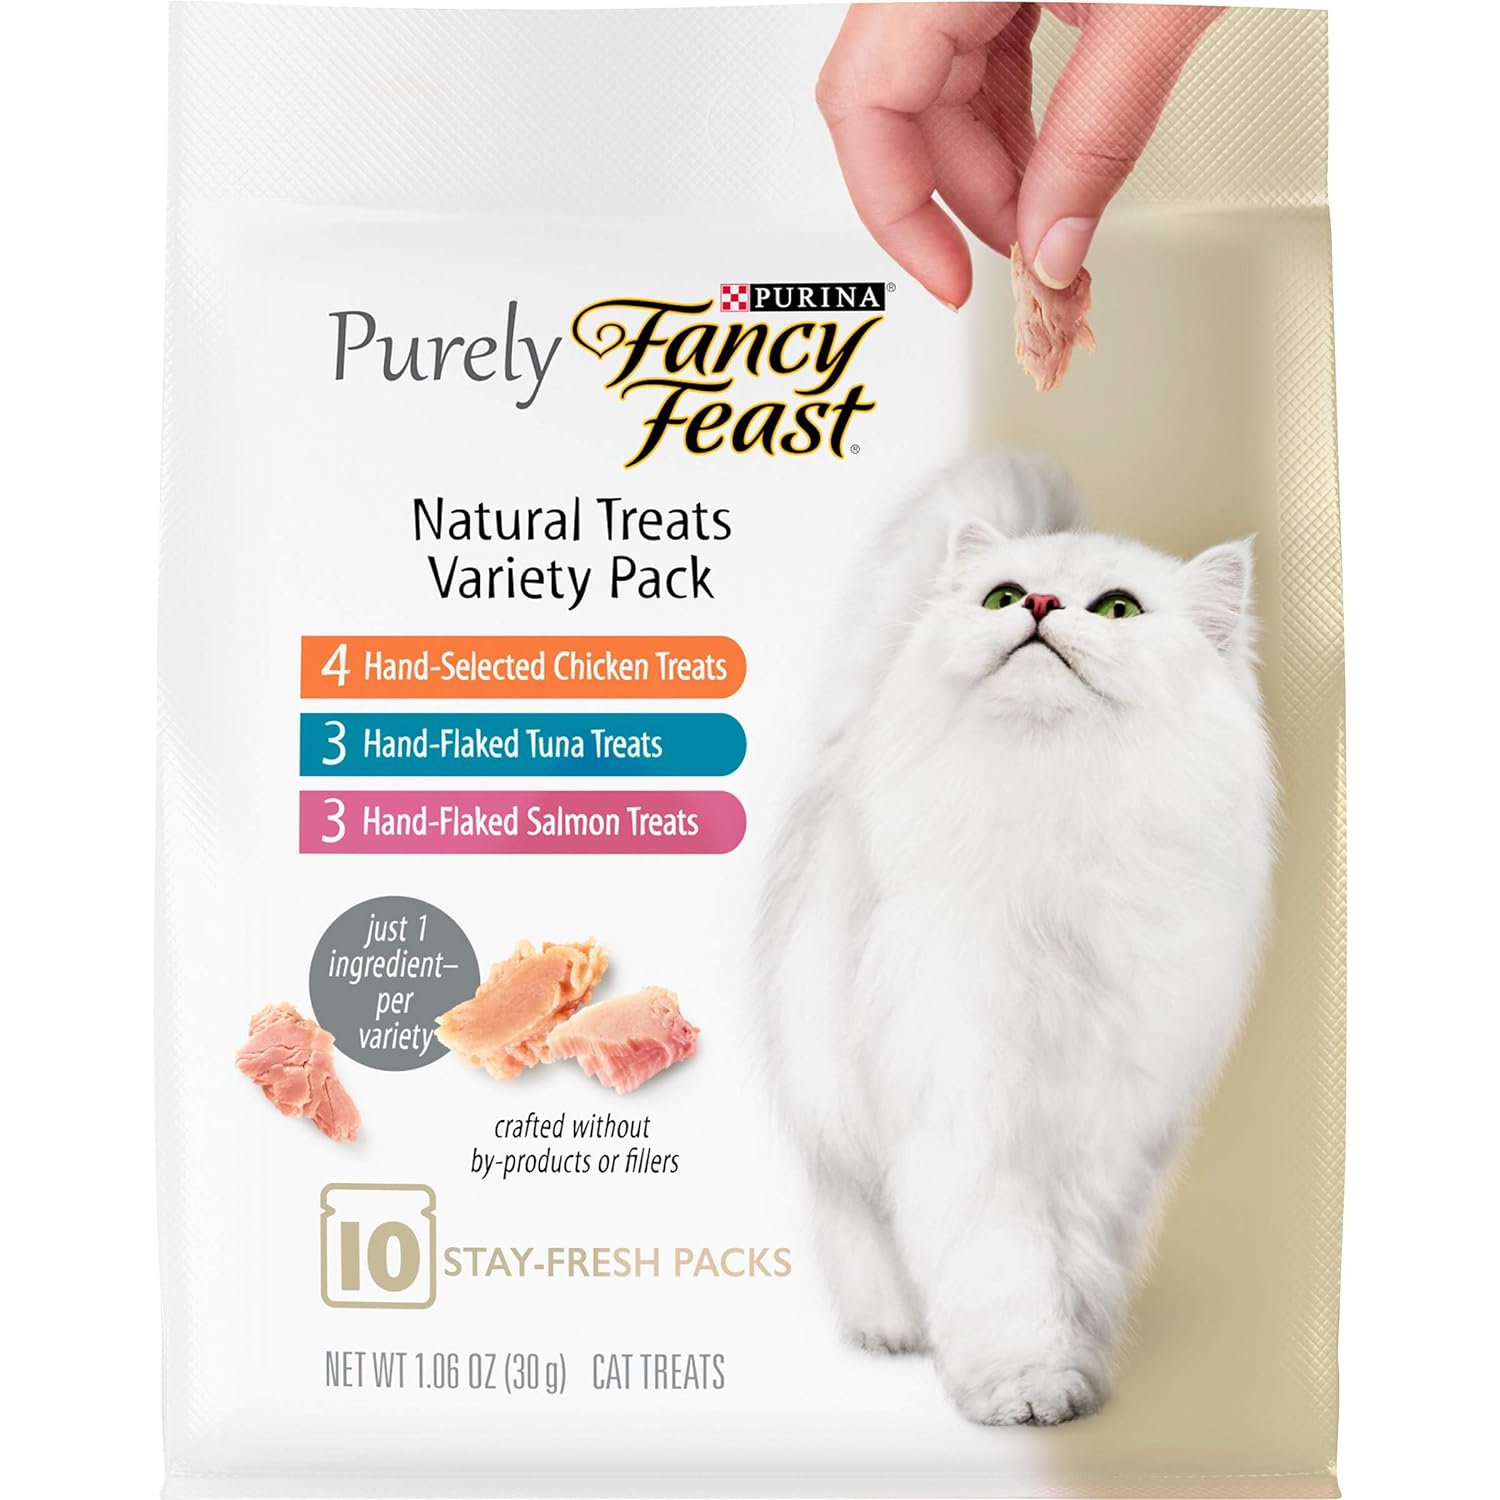 Purina Fancy Feast Natural Cat Treats Variety Pack, Purely Natural - (Pack of 5) 10 ct. Pouches new